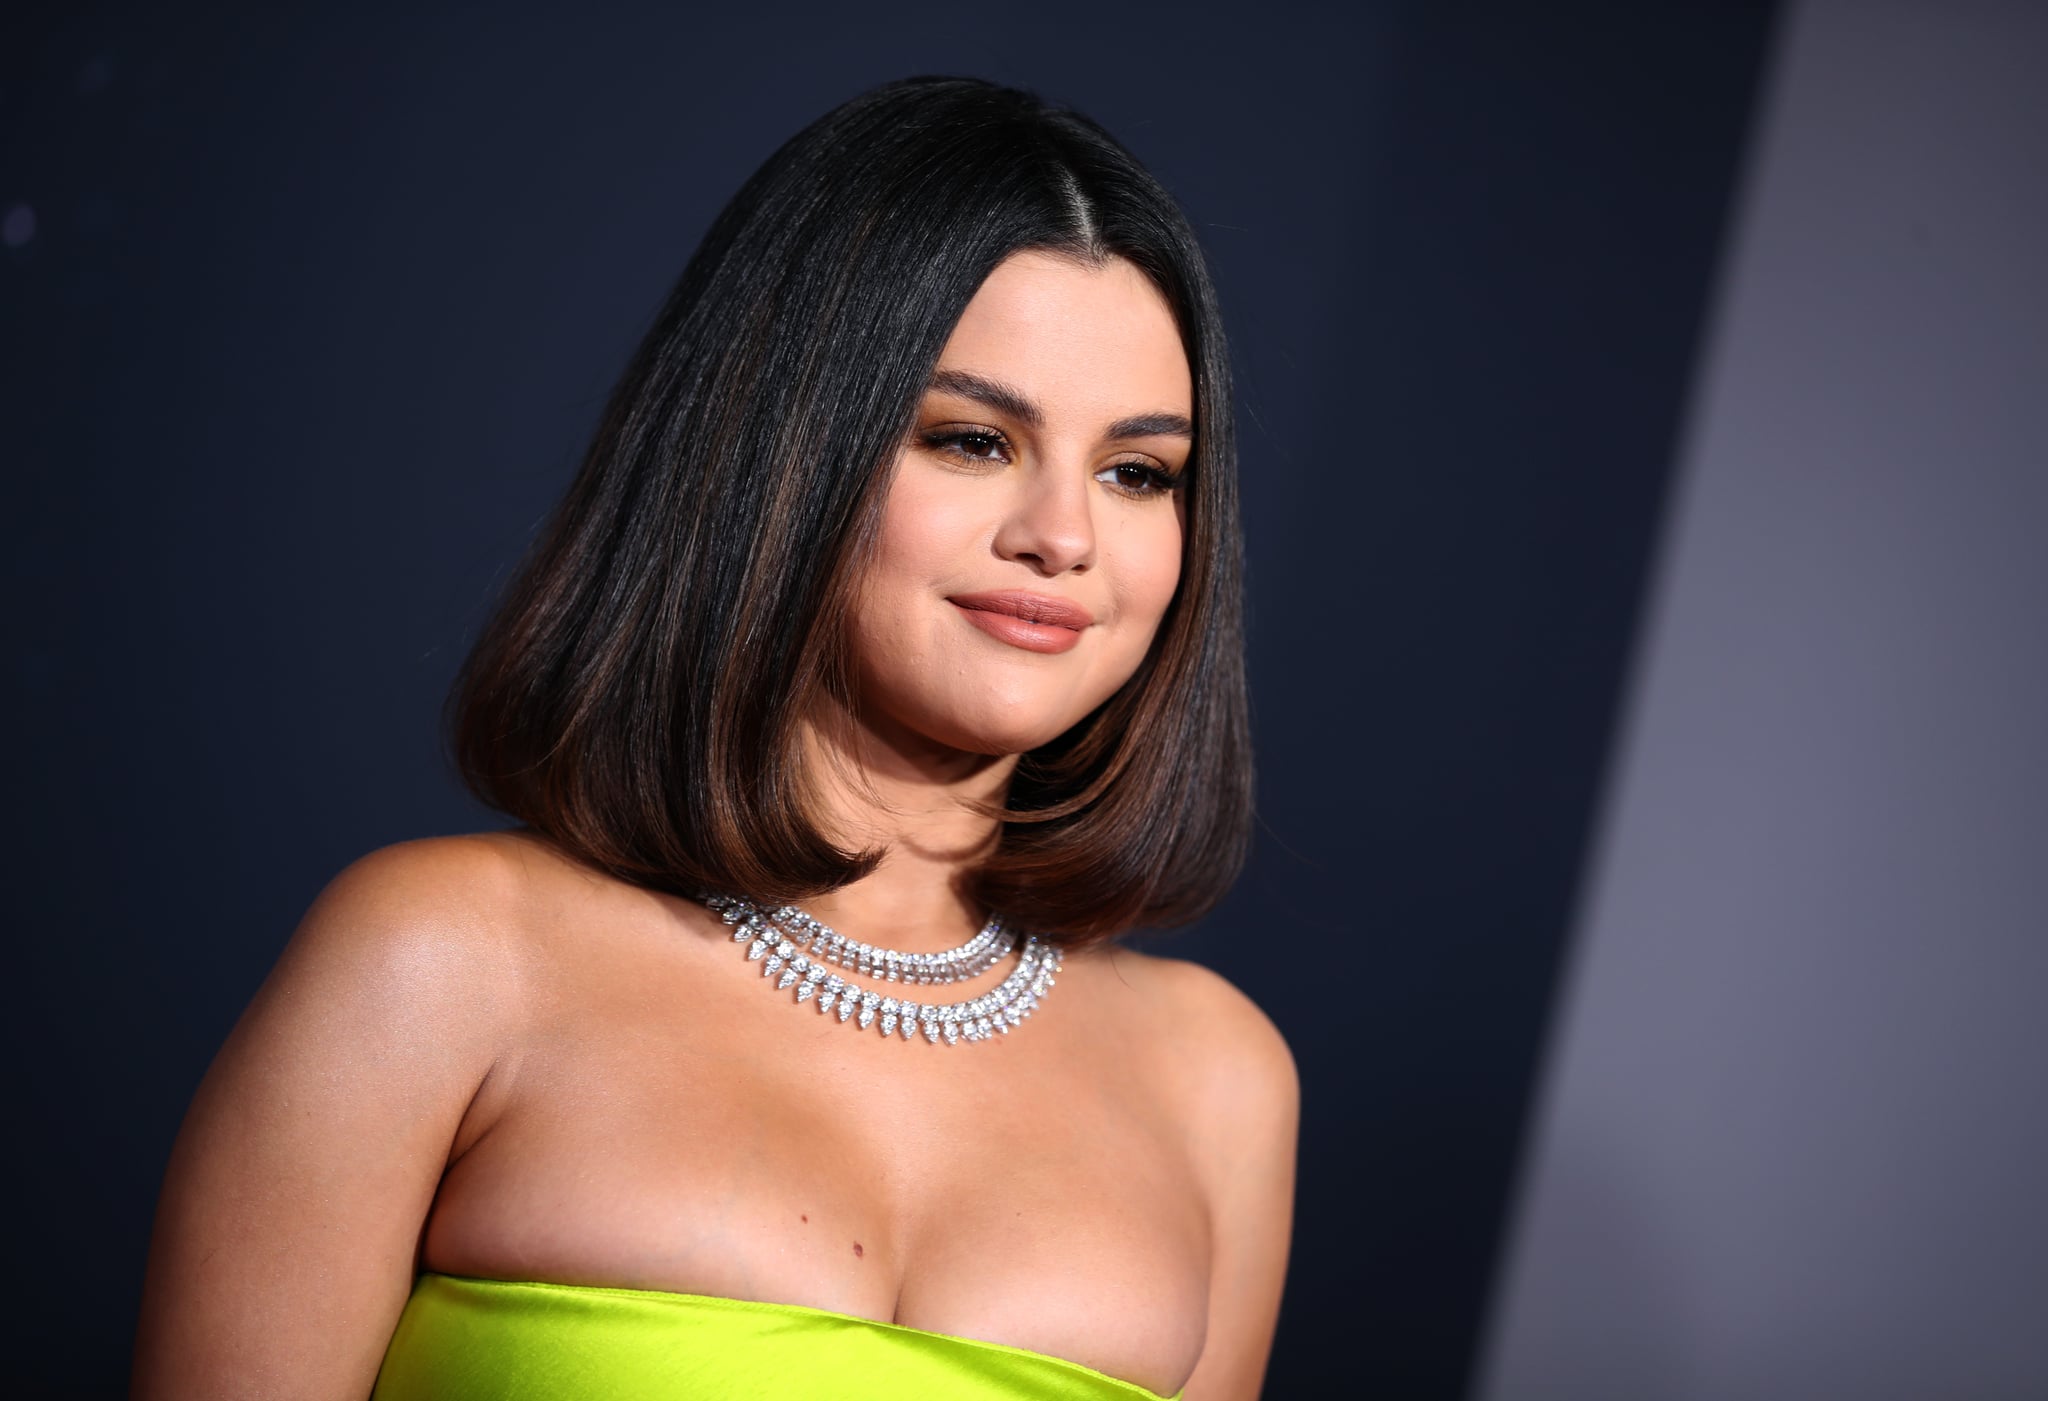 LOS ANGELES, CALIFORNIA - NOVEMBER 24: Selena Gomez attends the 2019 American Music Awards at Microsoft Theater on November 24, 2019 in Los Angeles, California. (Photo by Rich Fury/Getty Images)